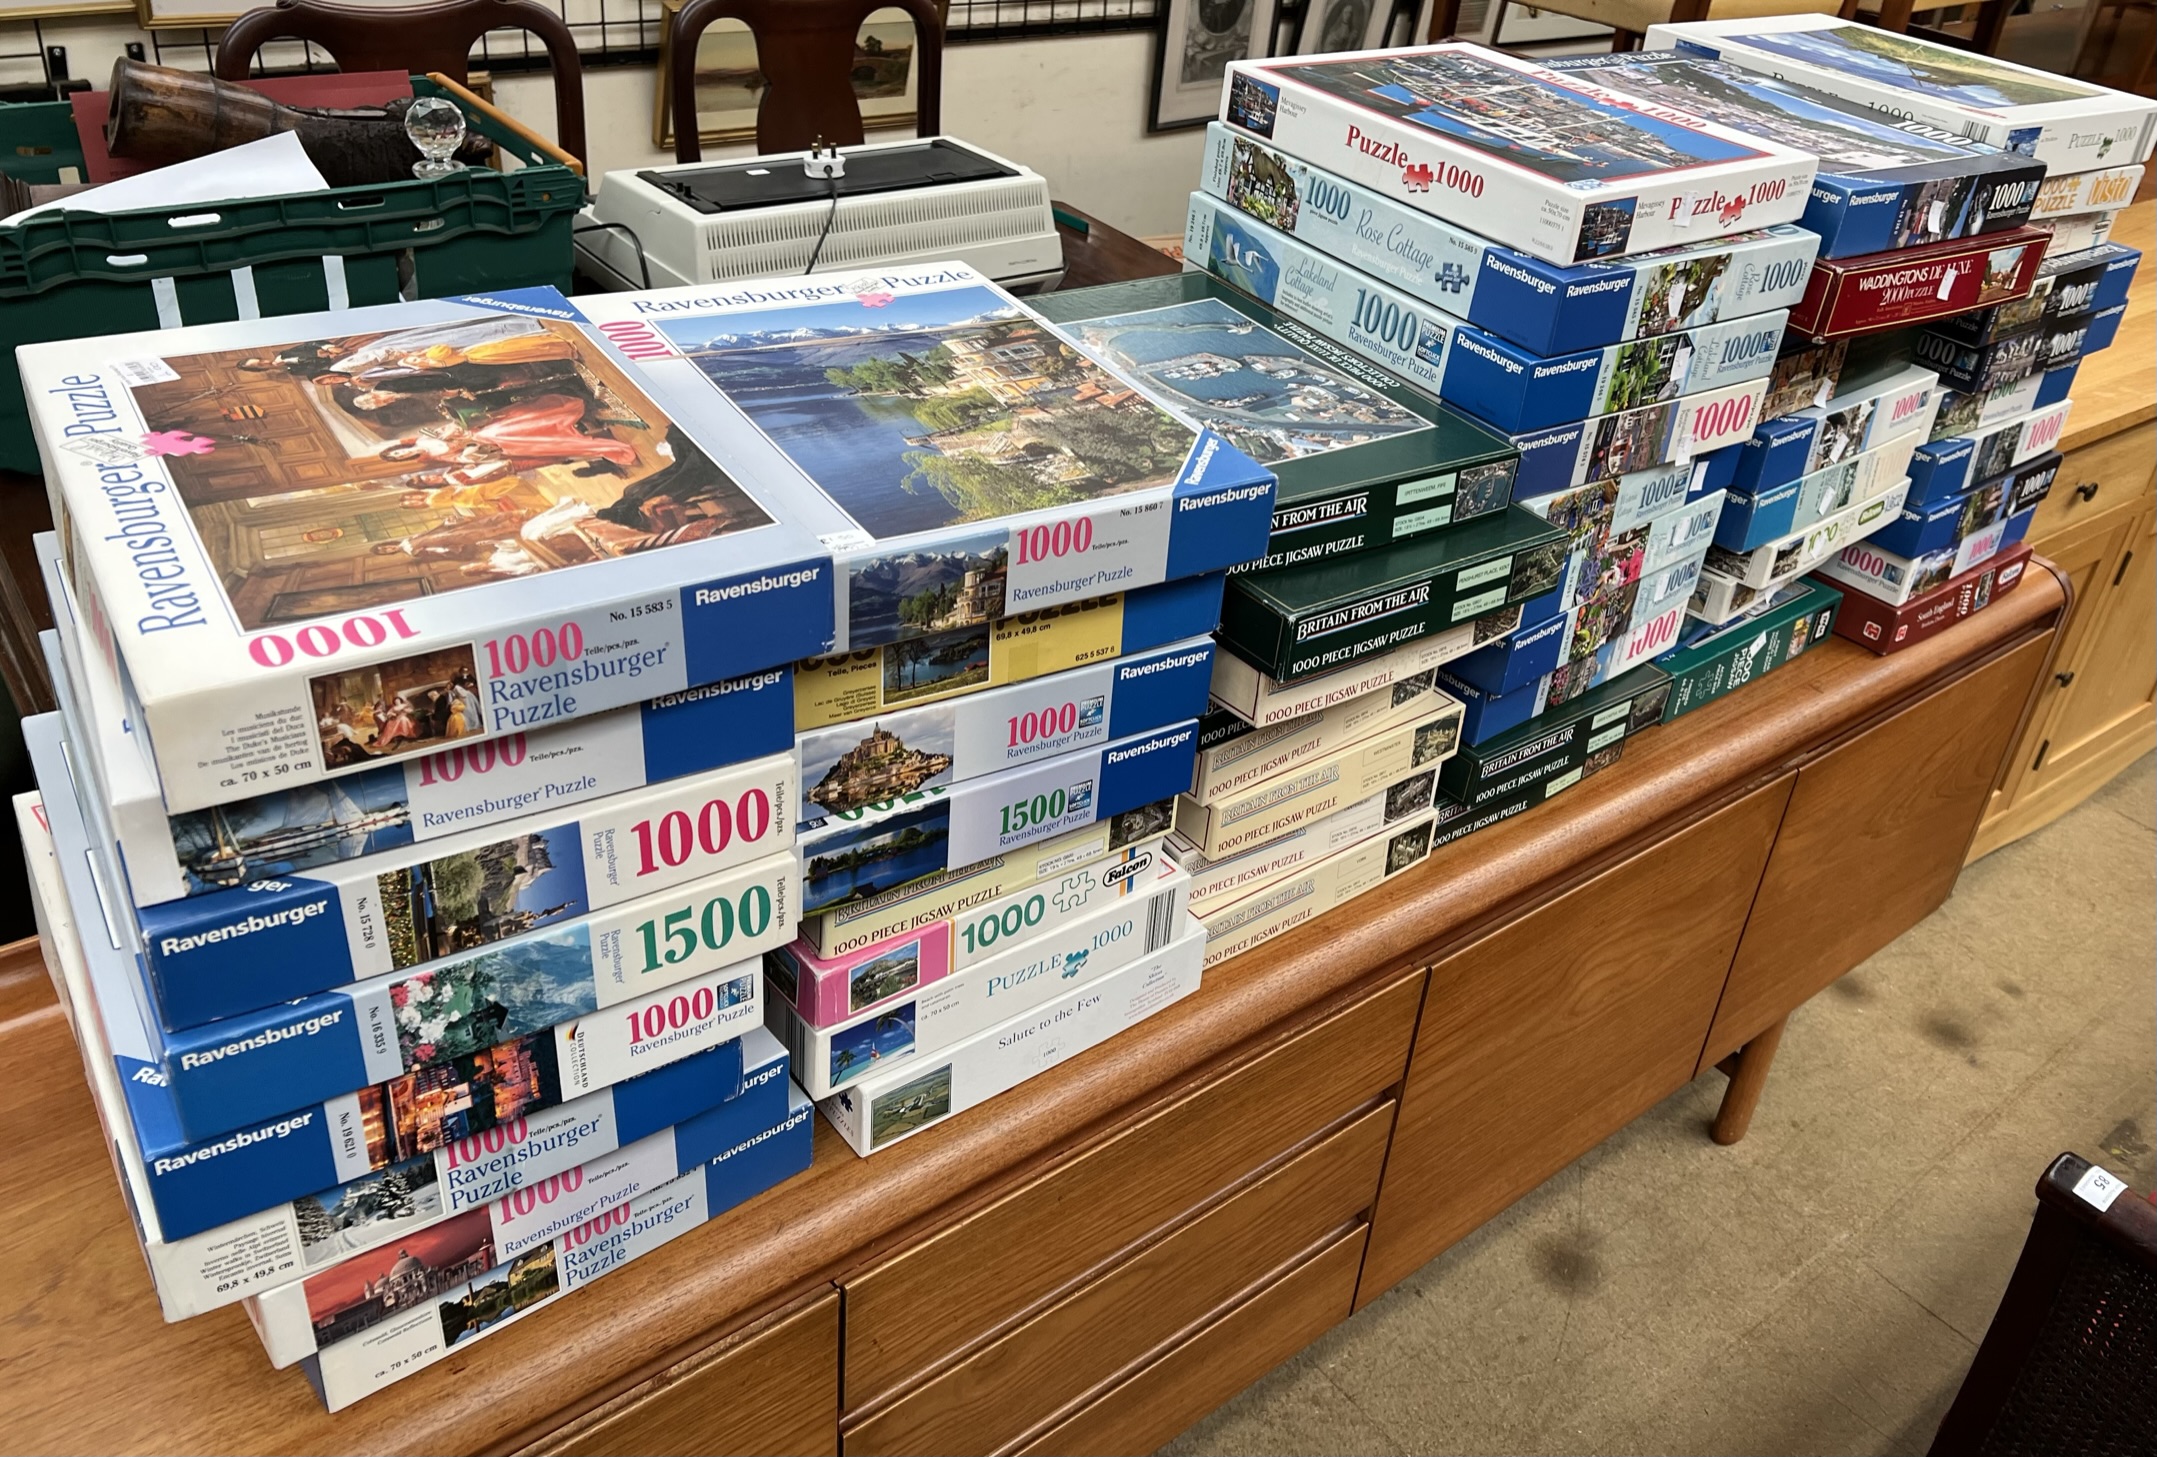 A large amount of jigsaw puzzles